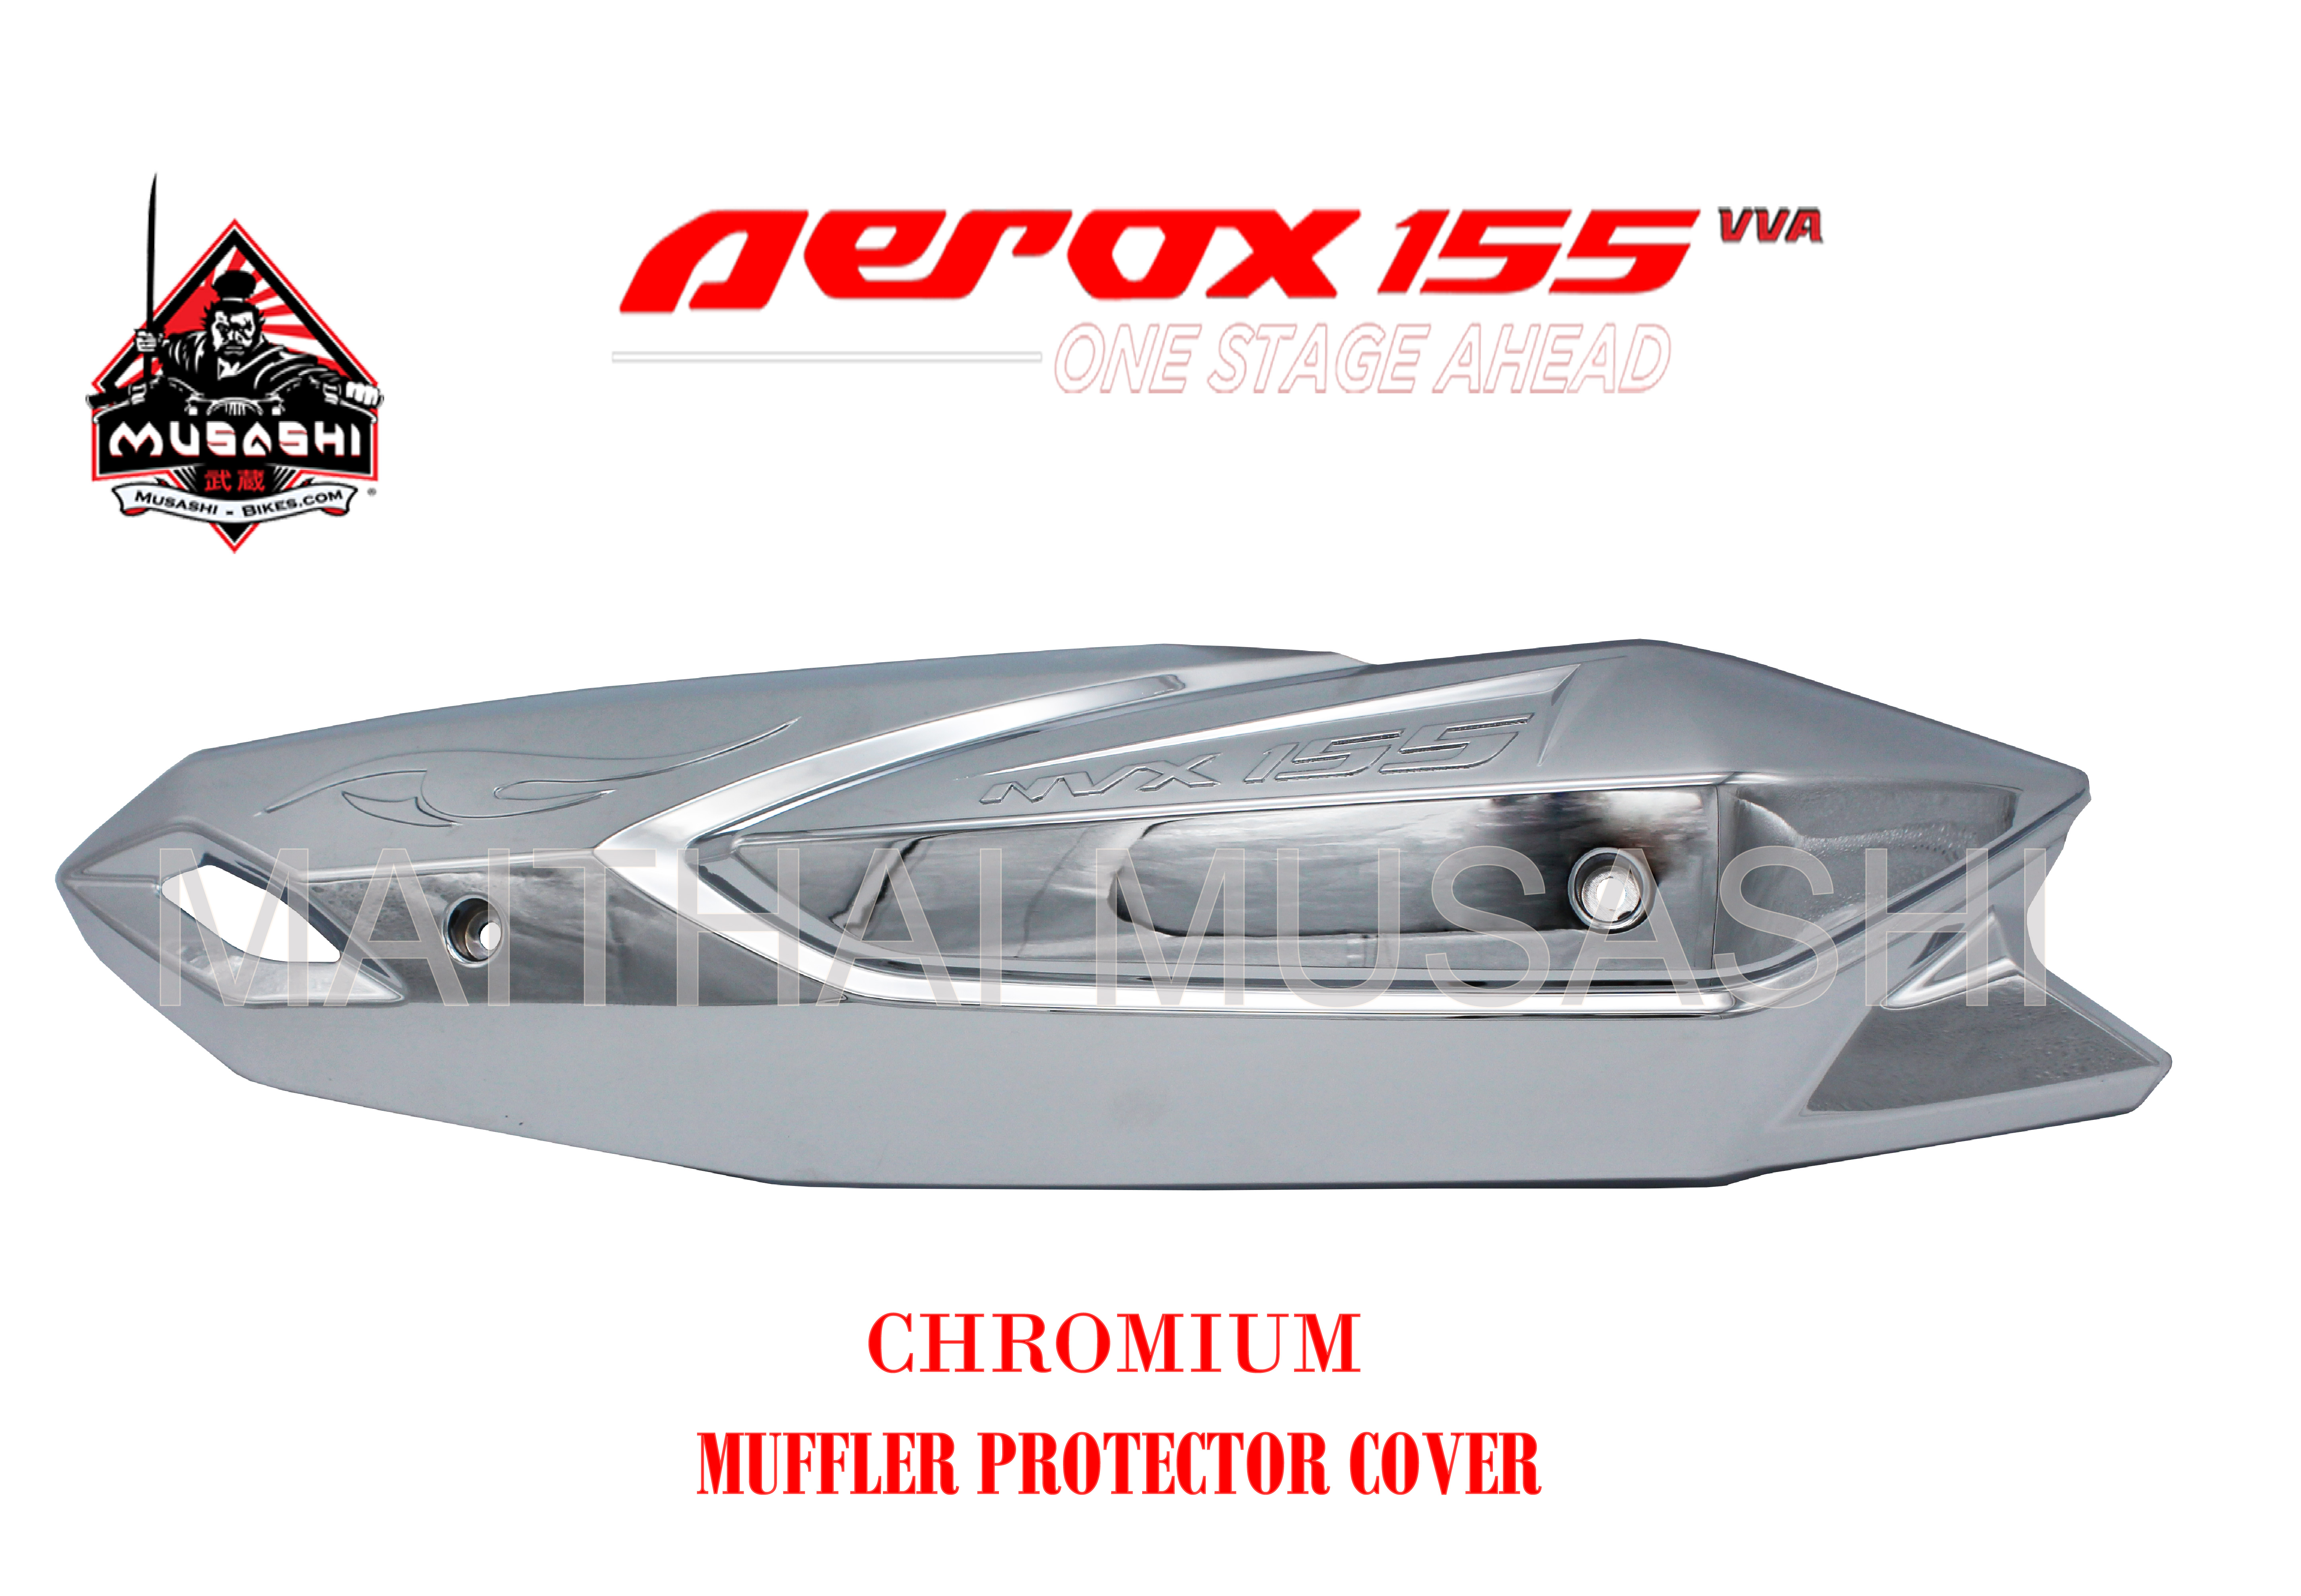 Muffler Protector Cover - MM649